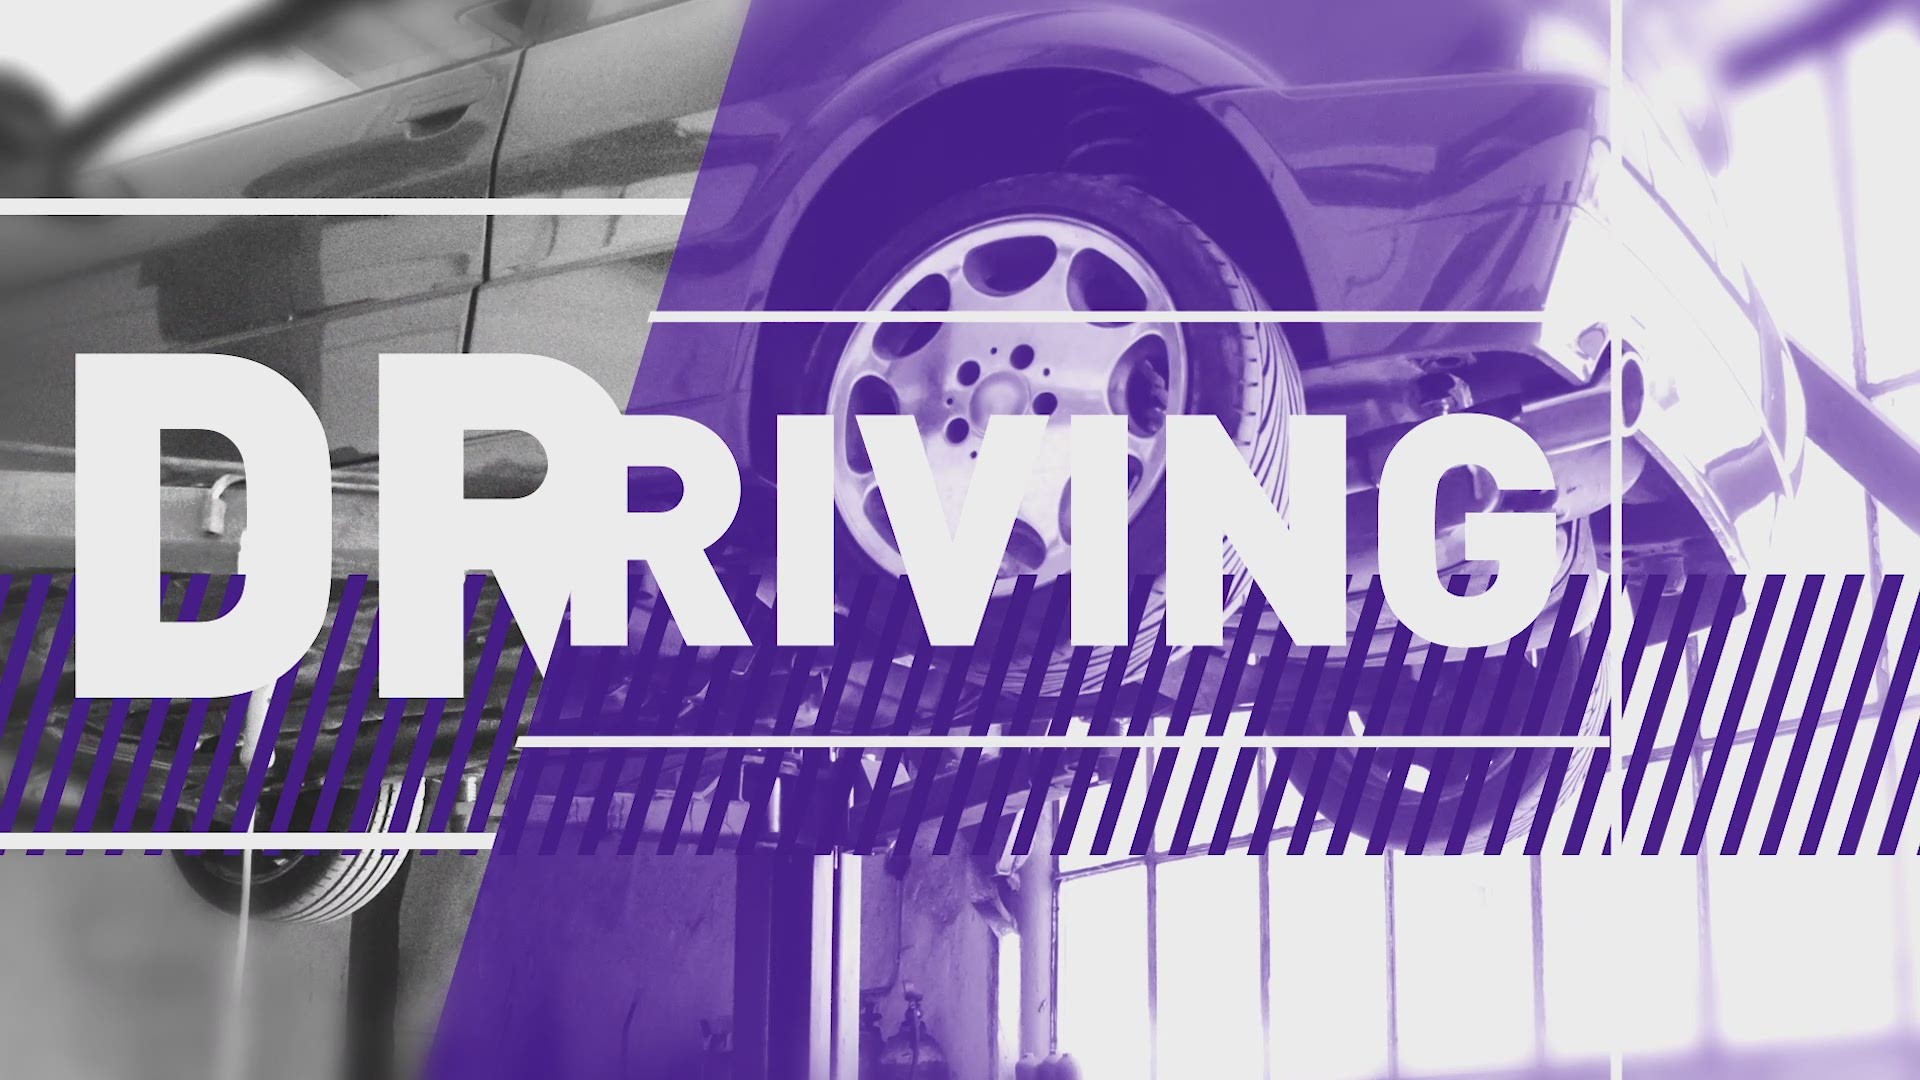 What are your driving pet peeves? Matt Schmitz of Cars.com goes over all the rude, dangerous and dumb things people do behind the wheel in this weeks segment of Driving Smart.